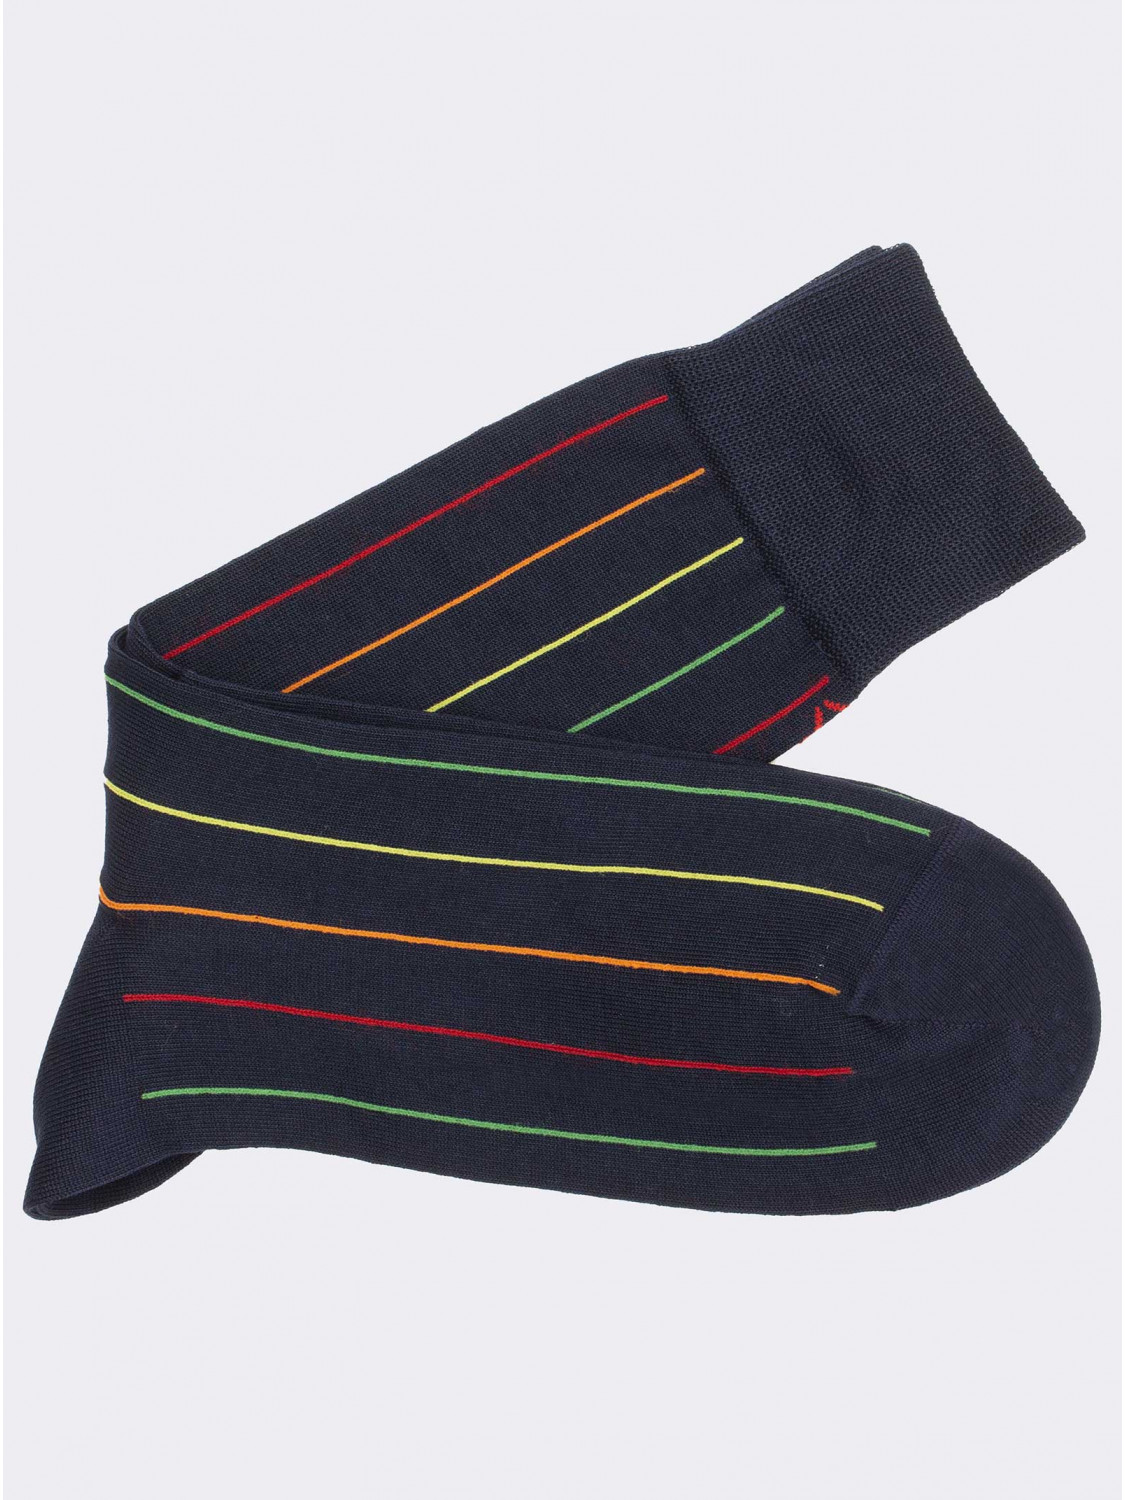 Men's Crew Socks with Vertical Stripes in Cotton